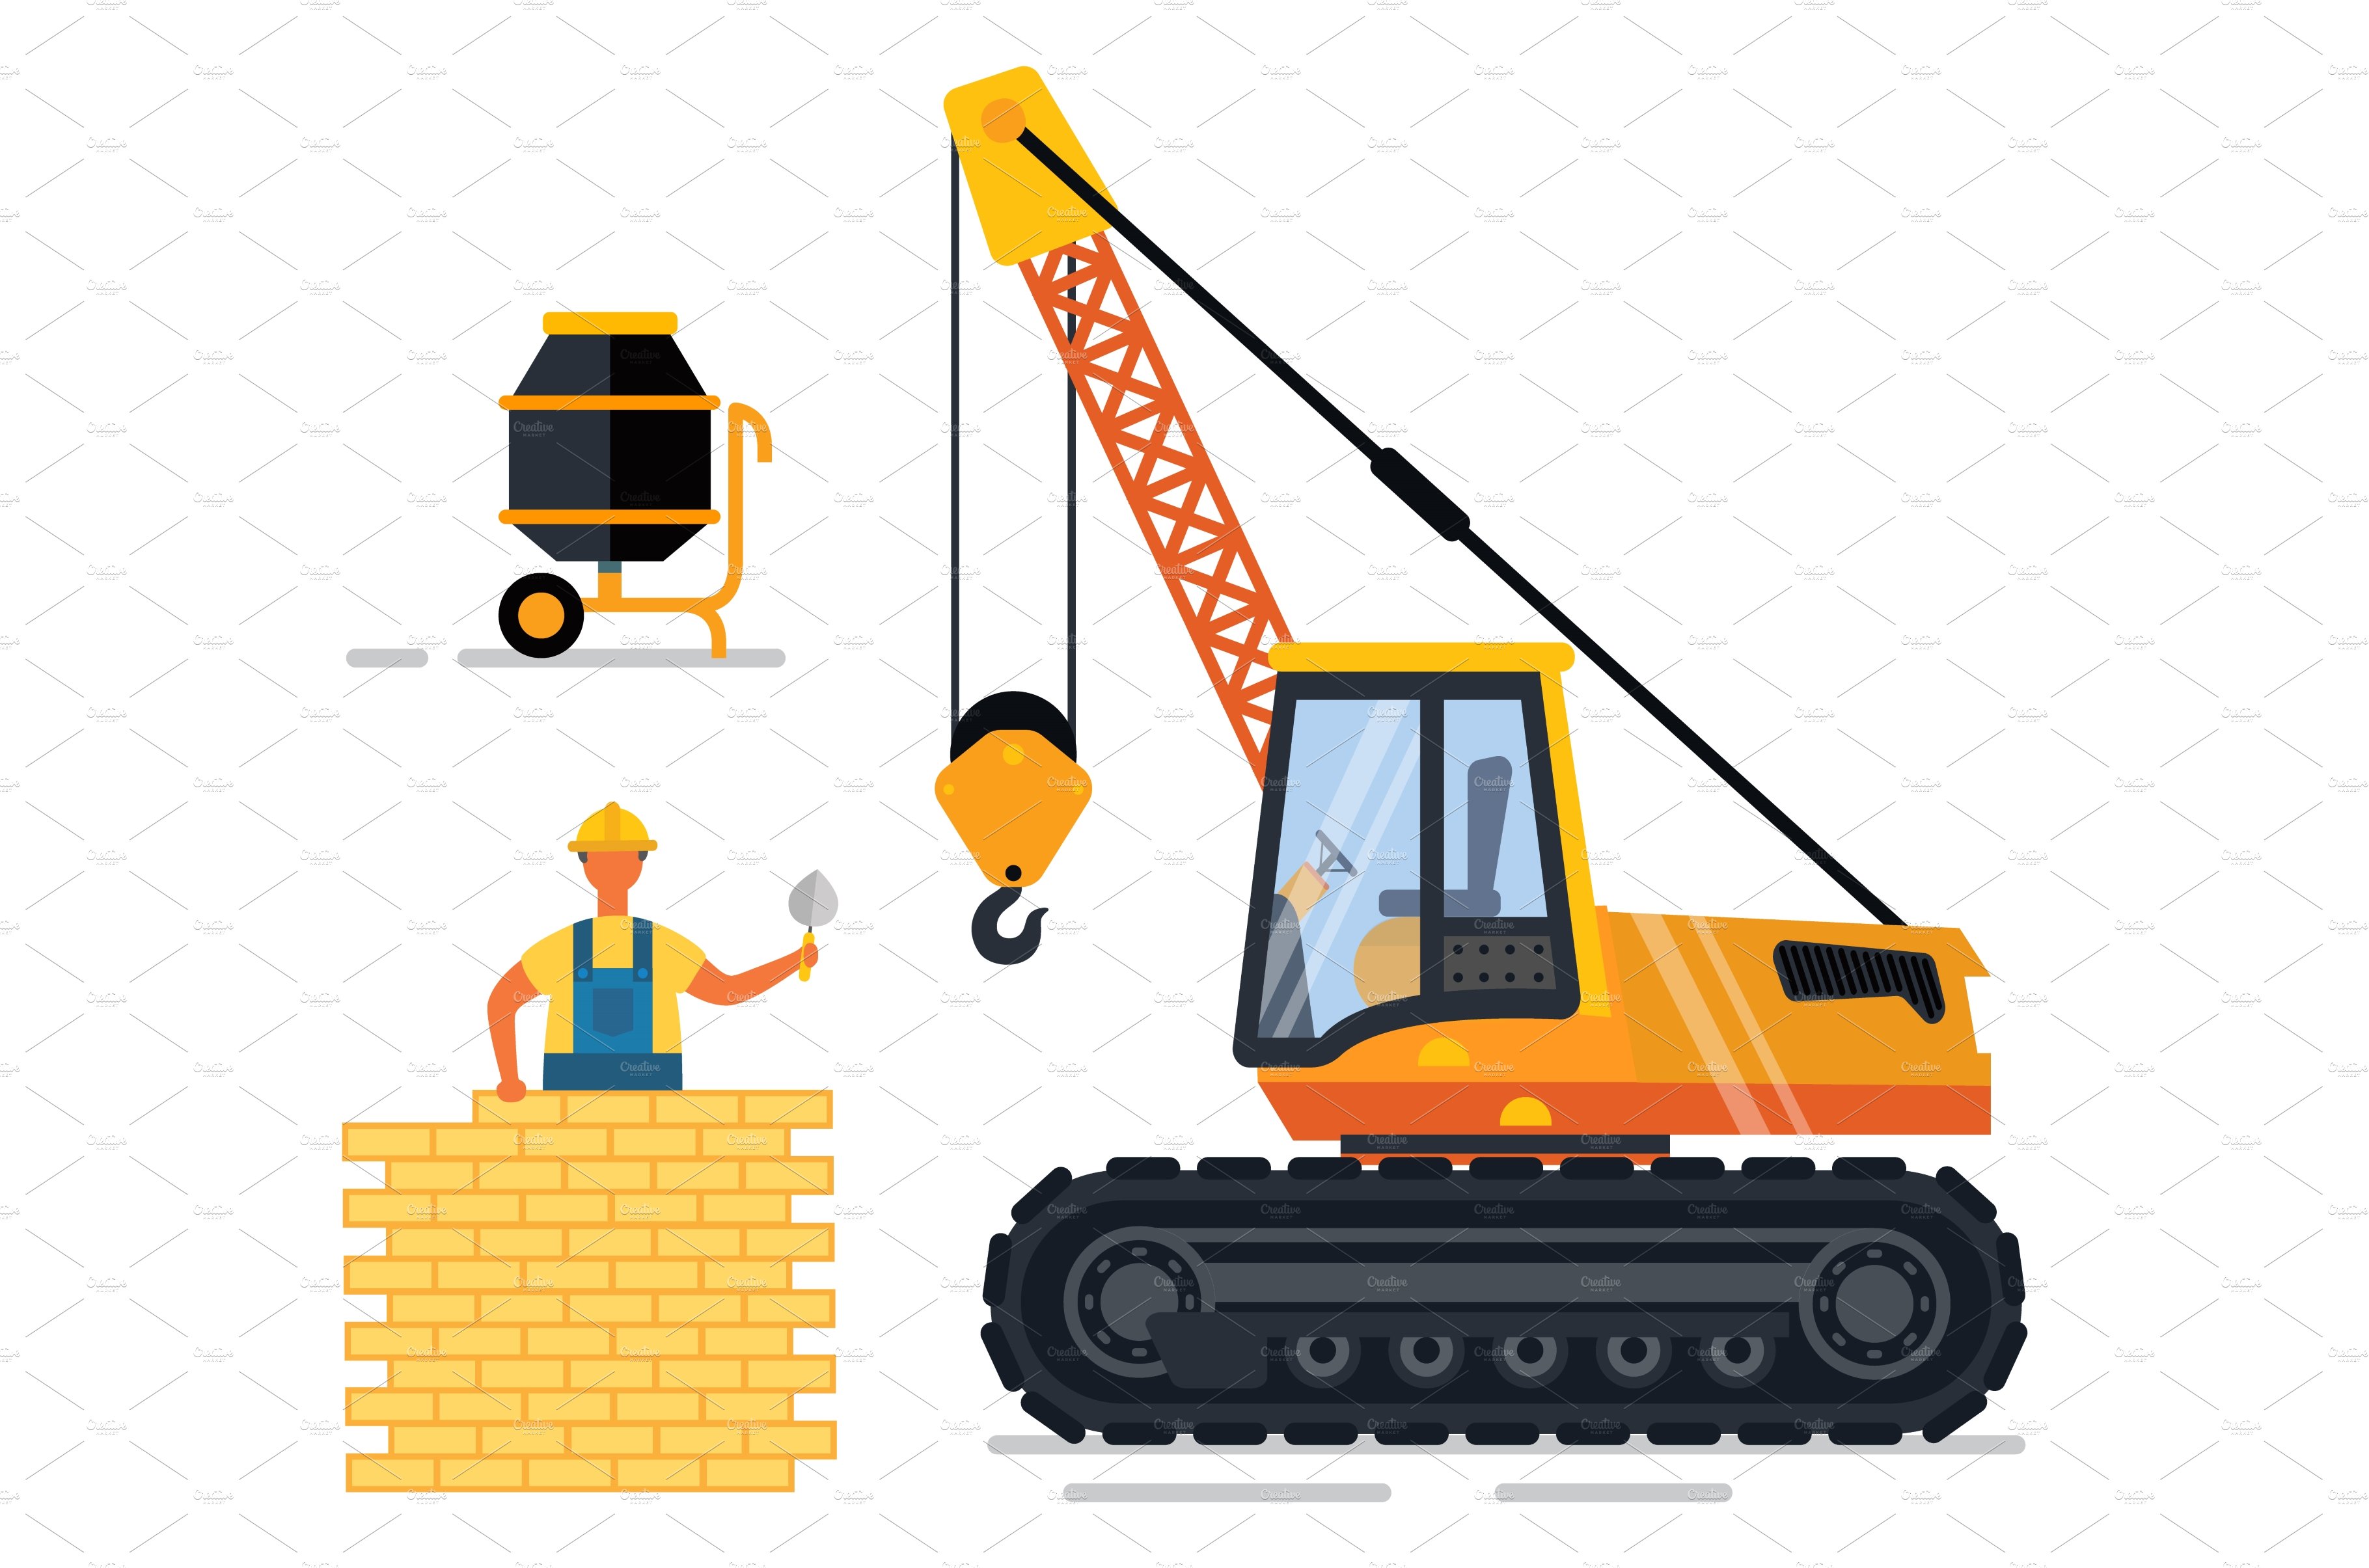 Construction Equipment and Man cover image.